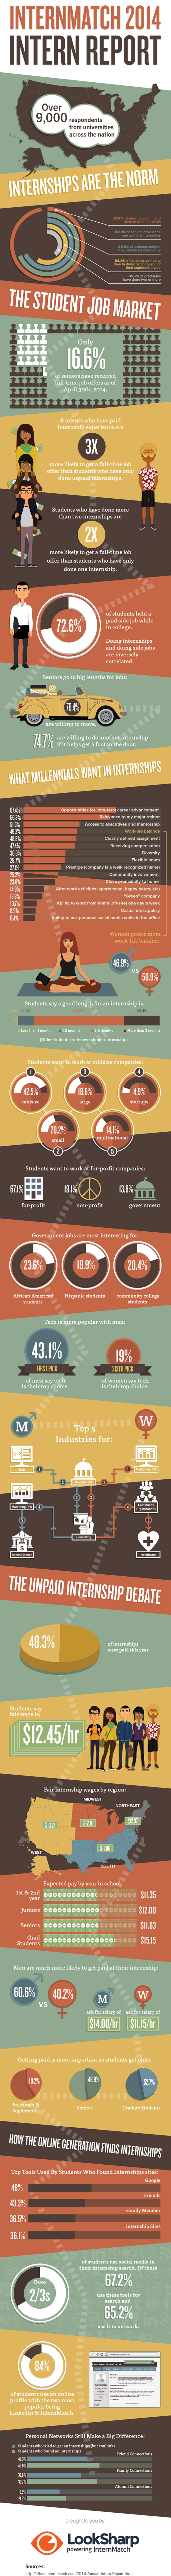 The 2014 State of the Internship